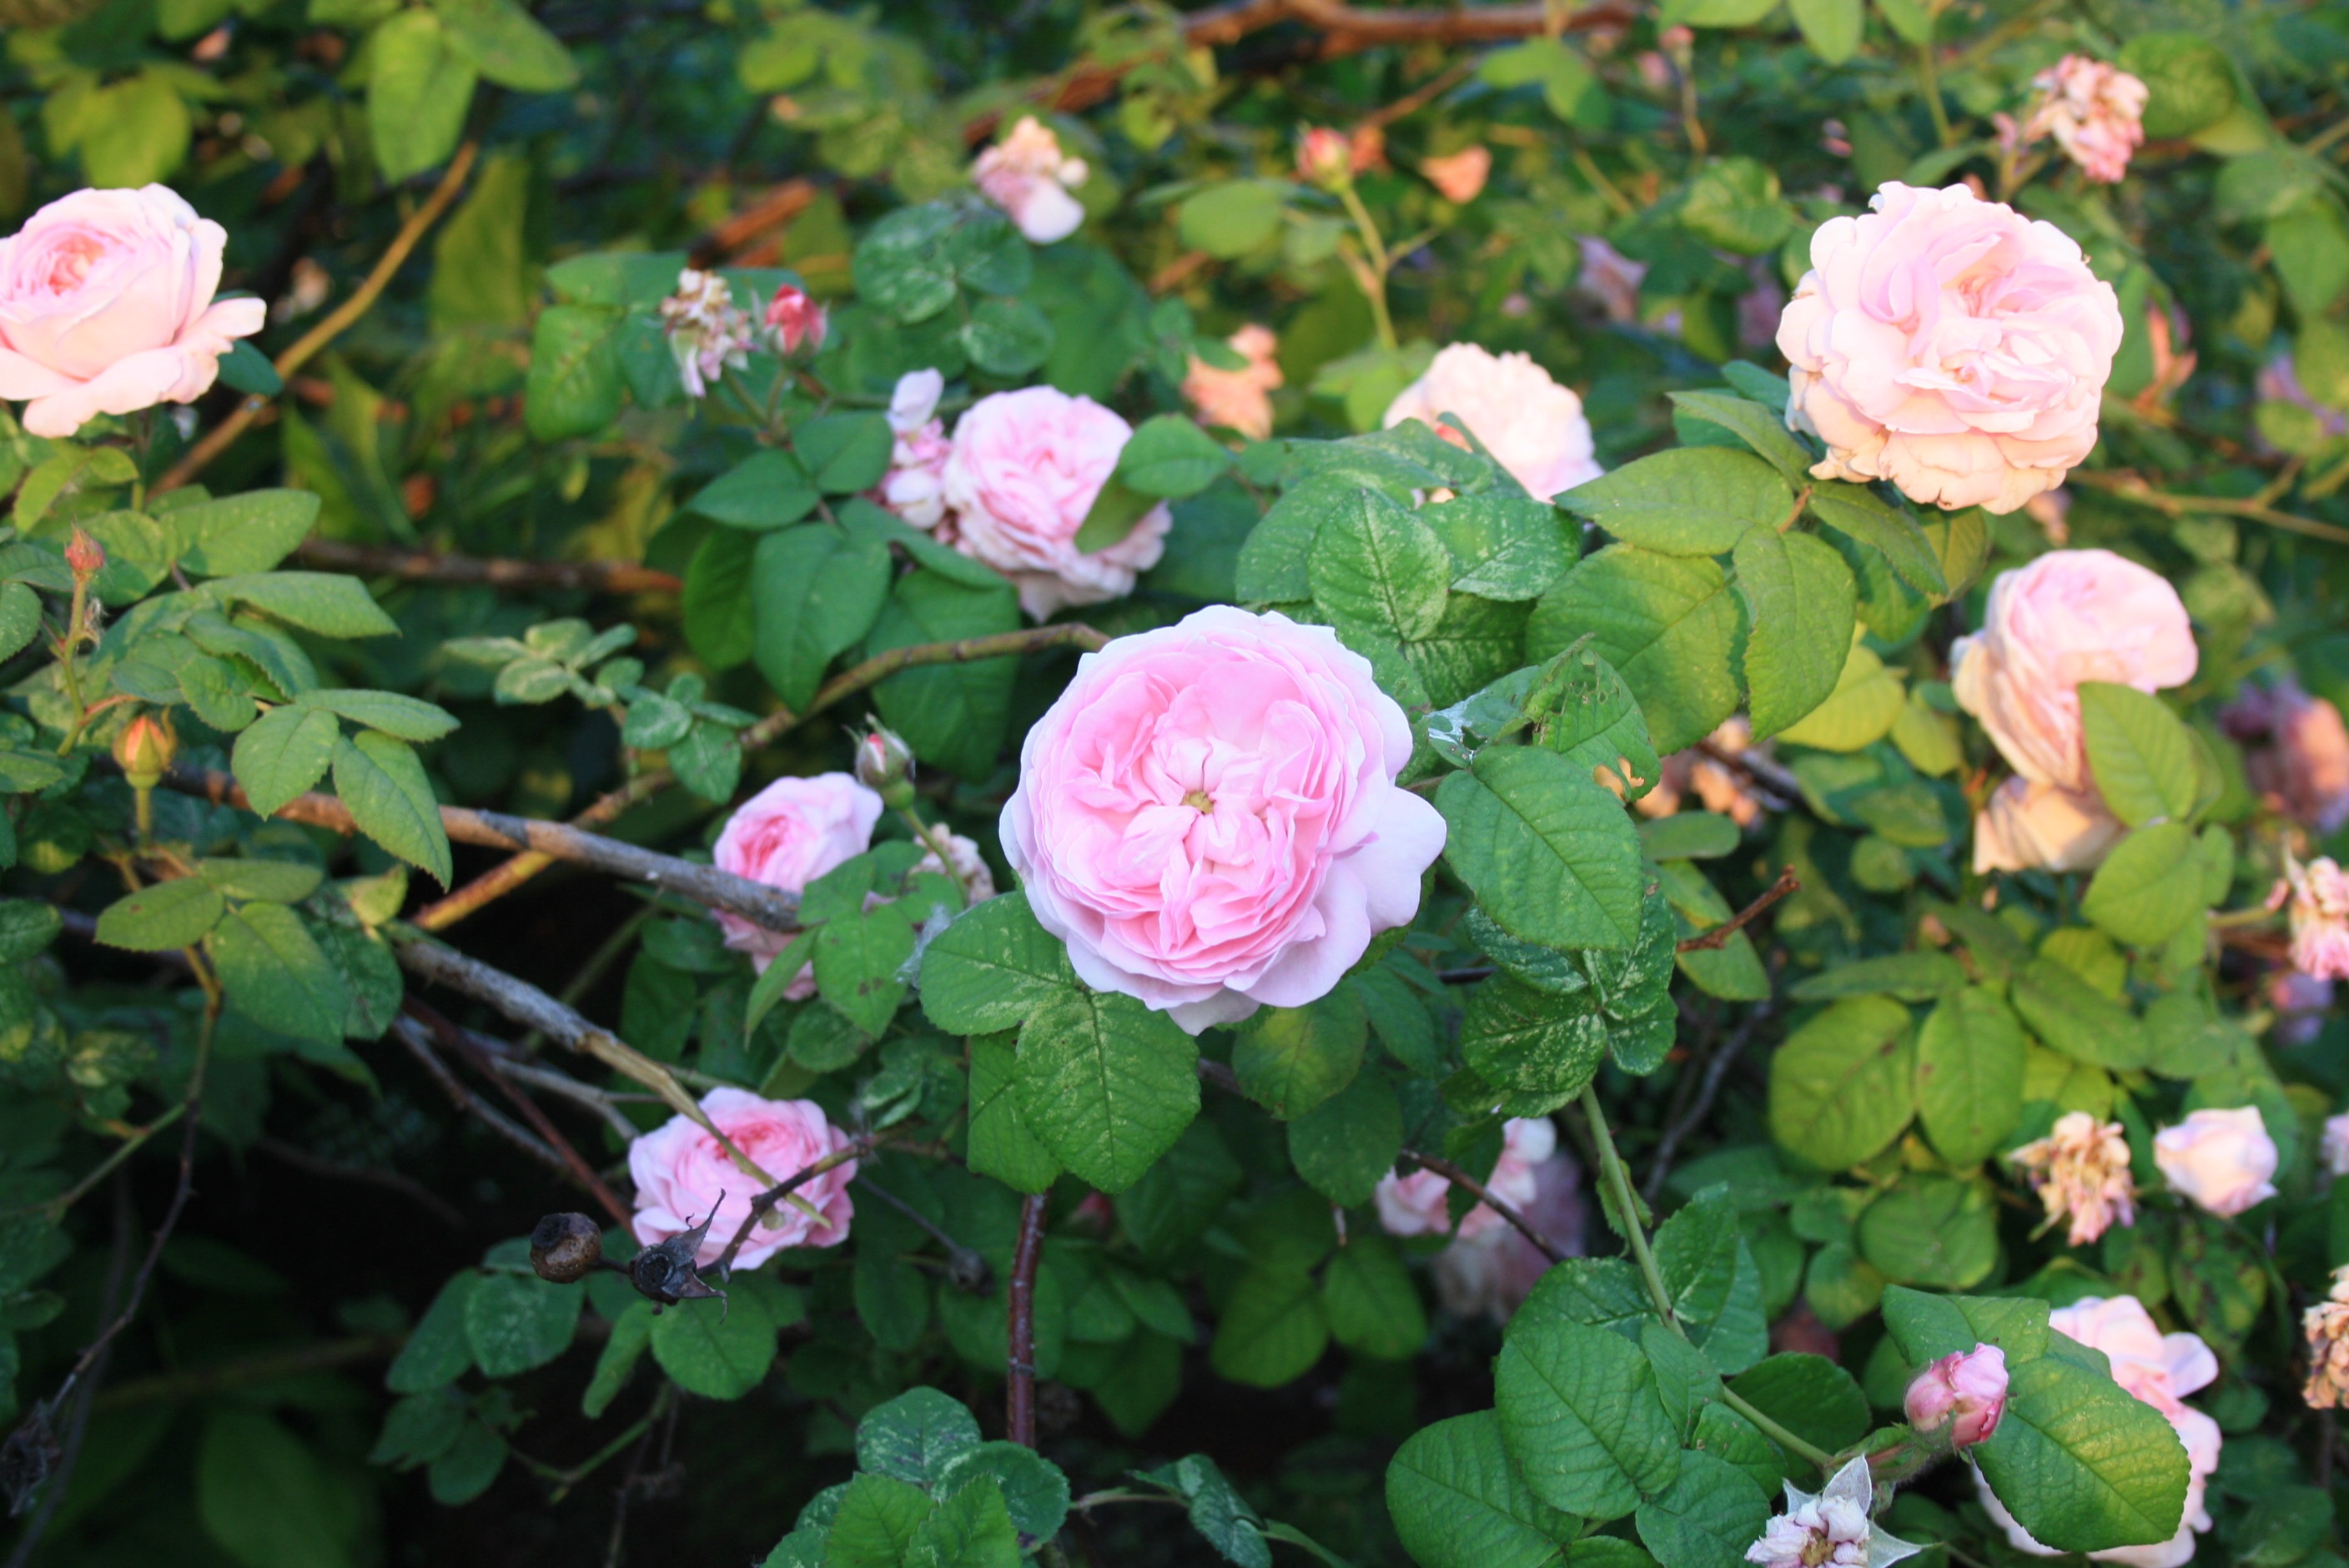 Widescreen image flowerbed, flowers, buds, roses